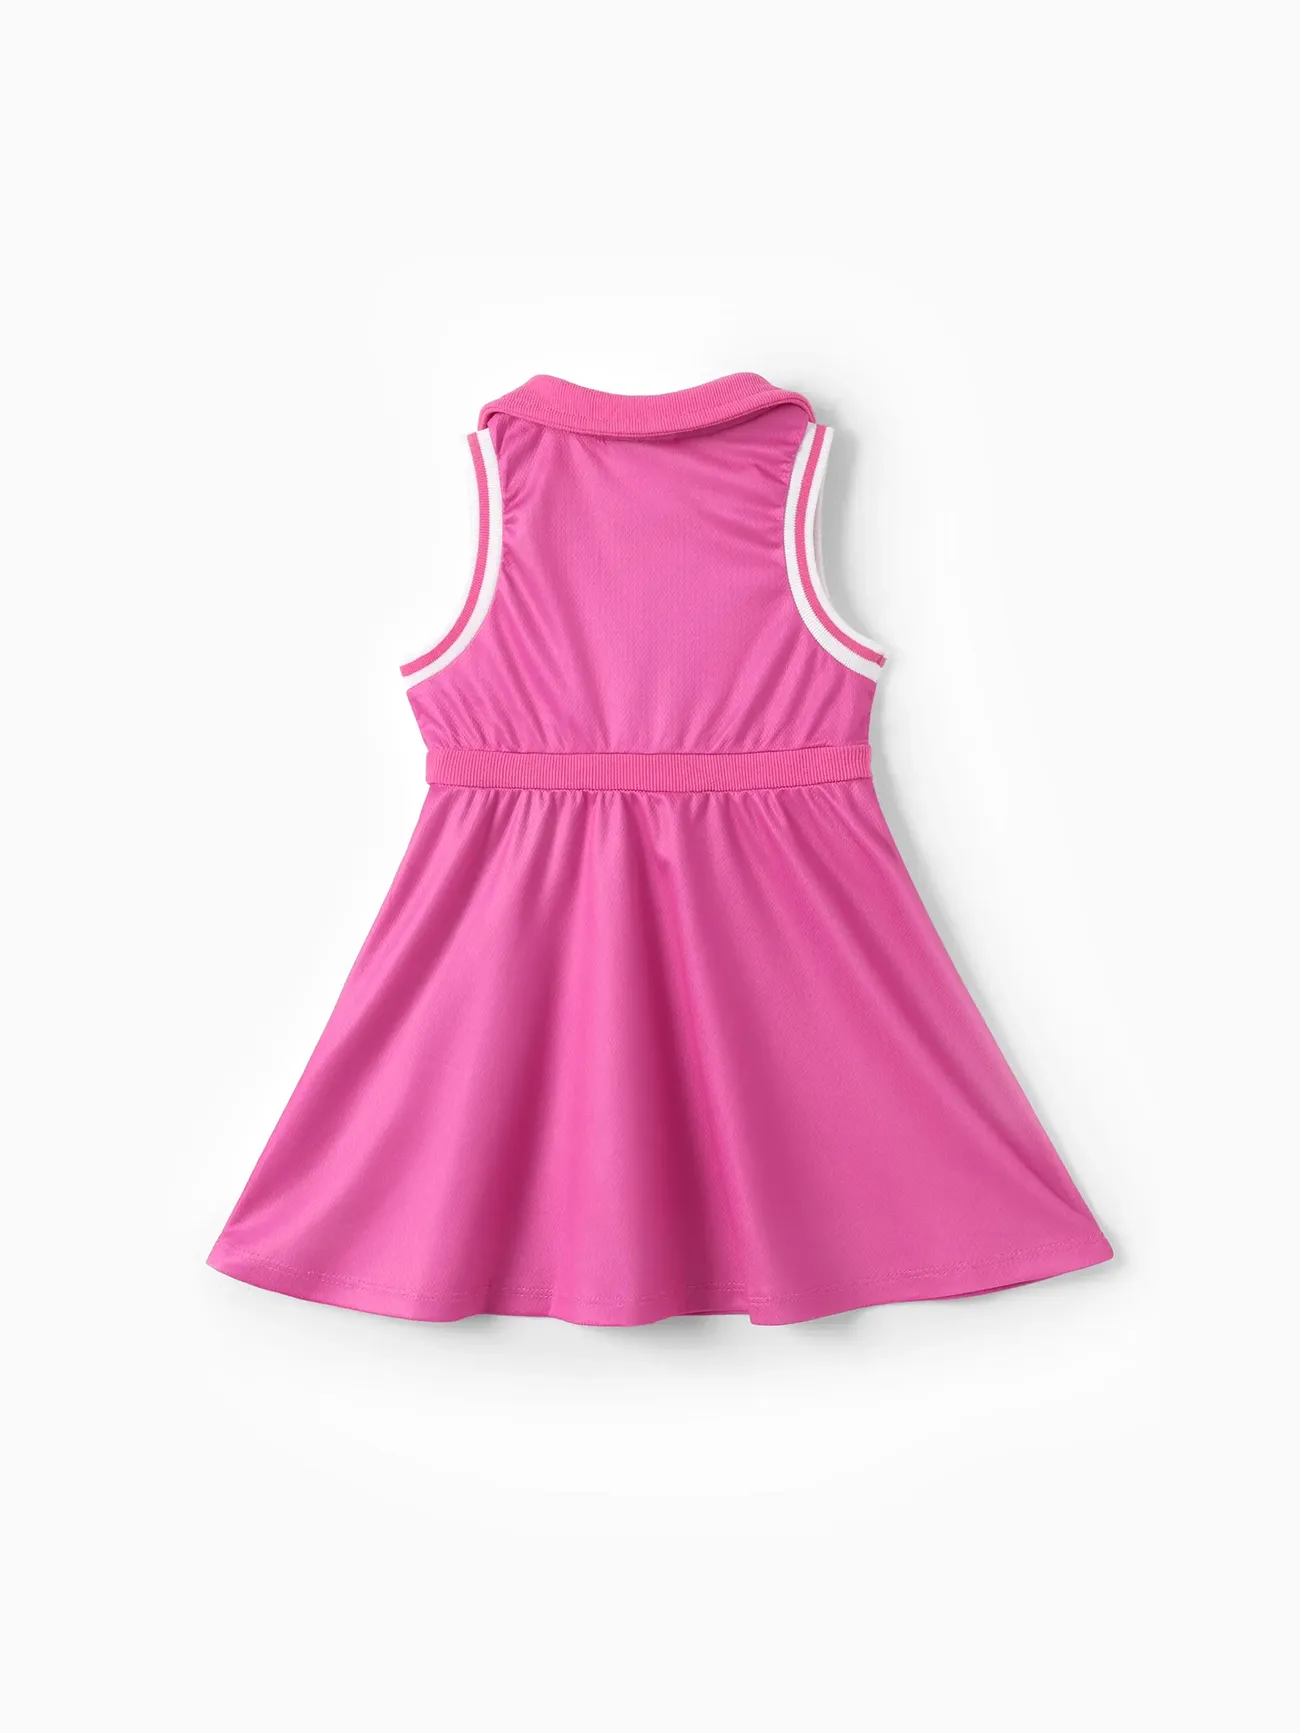 Barbie Toddler/Kid Girls 1pc Classic Letter Logo with Number Print Sporty Sleeveless Bowknot Polo Dress Pink big image 1